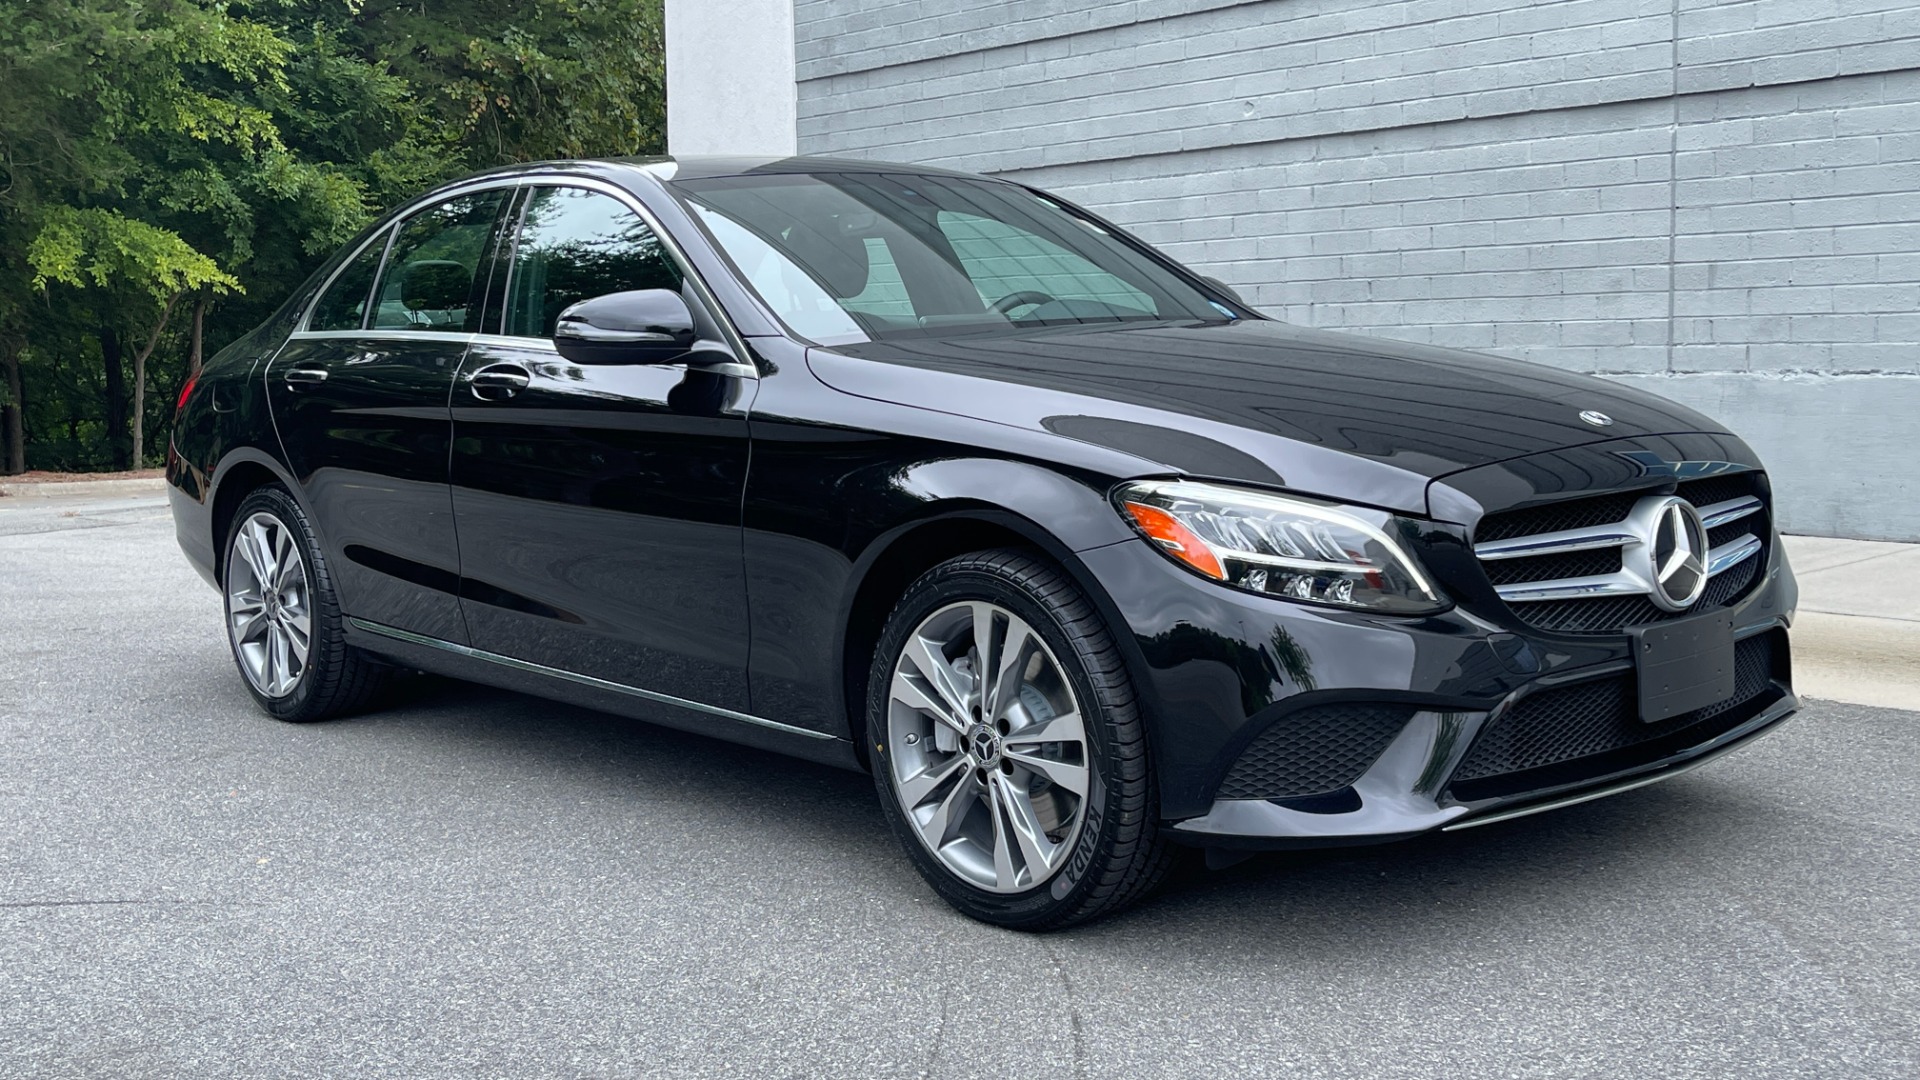 Used 2019 Mercedes-Benz C-Class C 300 / 4MATIC / BURMESTER SOUND / PANORAMIC ROOF / PREMIUM / MULTIMEDIA for sale $33,495 at Formula Imports in Charlotte NC 28227 6